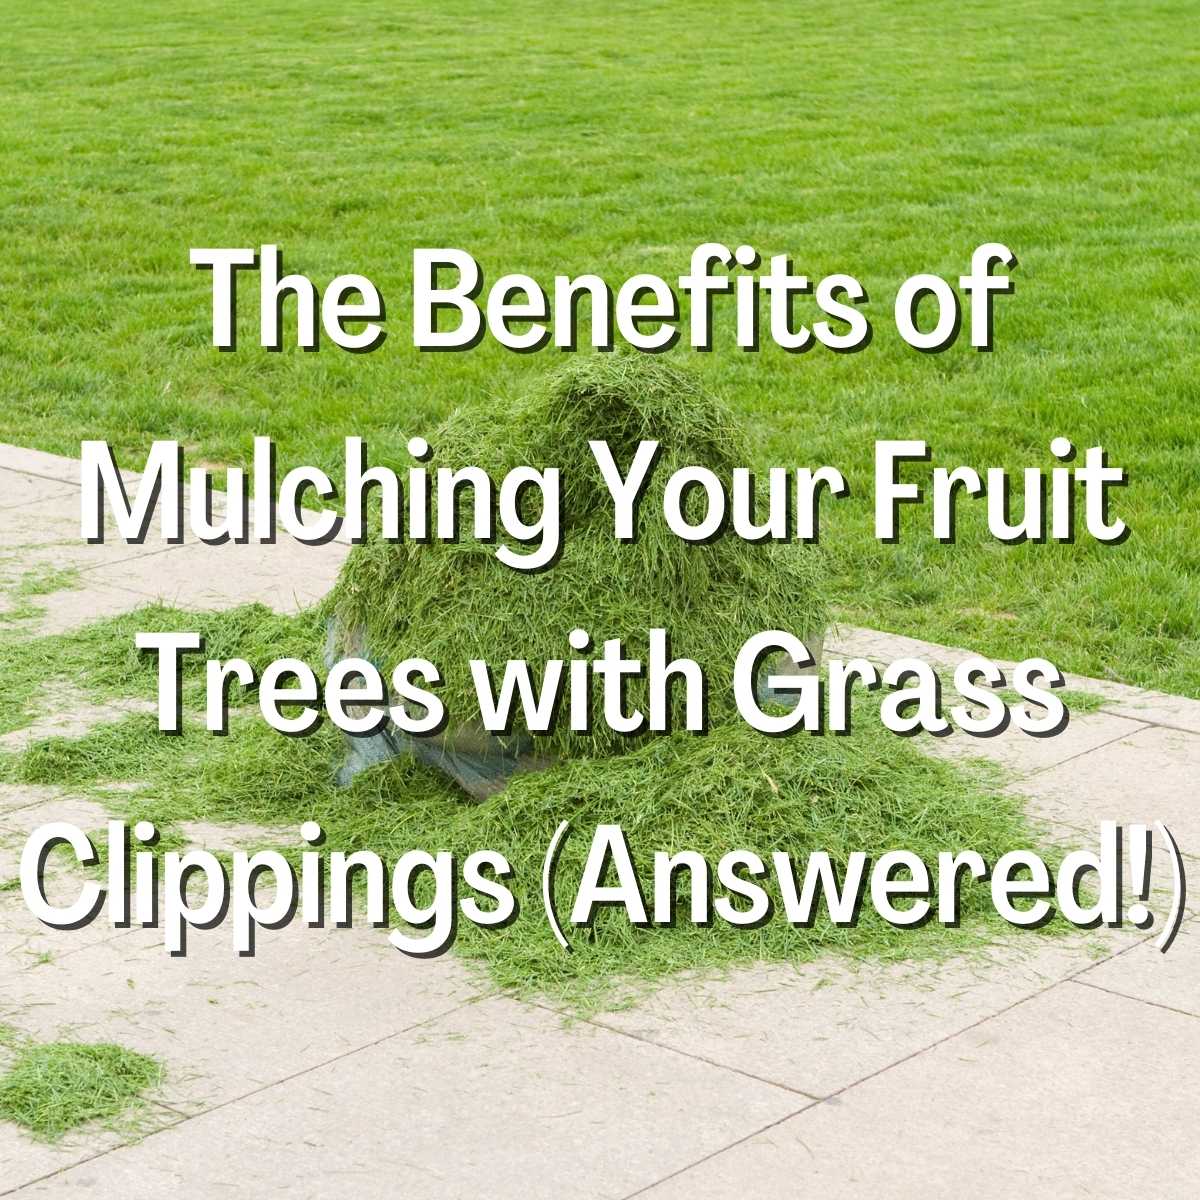 Mulching Your Fruit Trees with Grass Clippings